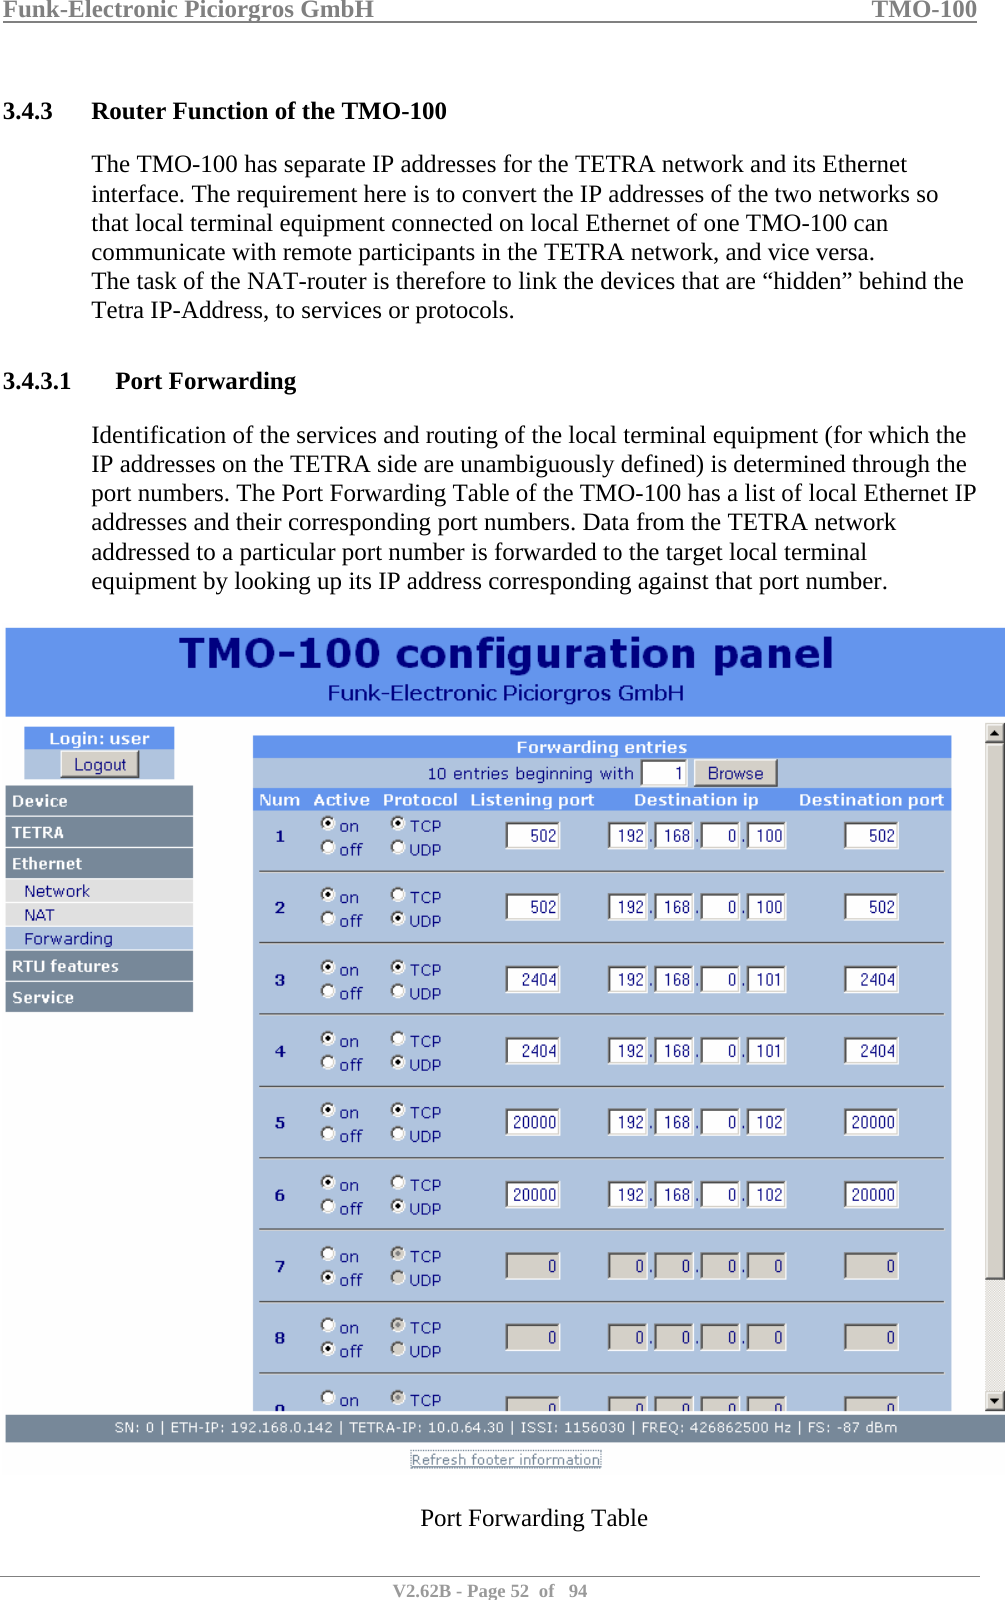 Funk-Electronic Piciorgros GmbH   TMO-100   V2.62B - Page 52  of   94   3.4.3 Router Function of the TMO-100 The TMO-100 has separate IP addresses for the TETRA network and its Ethernet interface. The requirement here is to convert the IP addresses of the two networks so that local terminal equipment connected on local Ethernet of one TMO-100 can communicate with remote participants in the TETRA network, and vice versa.  The task of the NAT-router is therefore to link the devices that are “hidden” behind the Tetra IP-Address, to services or protocols.  3.4.3.1 Port Forwarding Identification of the services and routing of the local terminal equipment (for which the IP addresses on the TETRA side are unambiguously defined) is determined through the port numbers. The Port Forwarding Table of the TMO-100 has a list of local Ethernet IP addresses and their corresponding port numbers. Data from the TETRA network addressed to a particular port number is forwarded to the target local terminal equipment by looking up its IP address corresponding against that port number.    Port Forwarding Table 